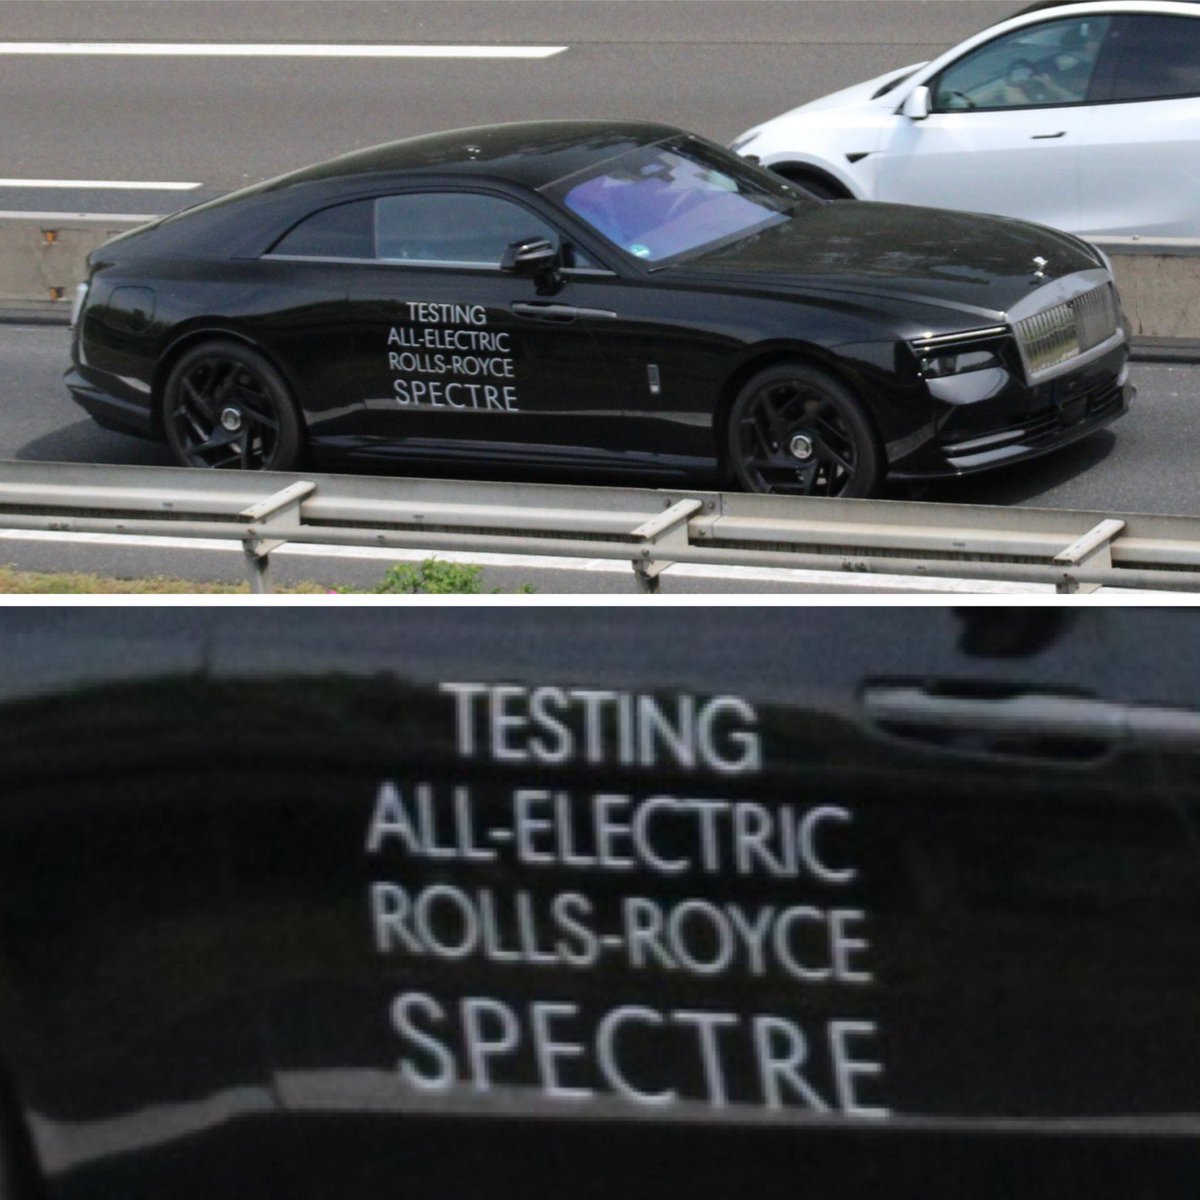 This morning I spotted an all-electric Rolls Royce Spectre test prototype on the road here in Sarasota! Cool to see!

I wasn’t able to get a picture of it as I was driving my wife’s car (with no dash cams) at the time, so this pic is from the internet (via AUTOGESPOT) but it